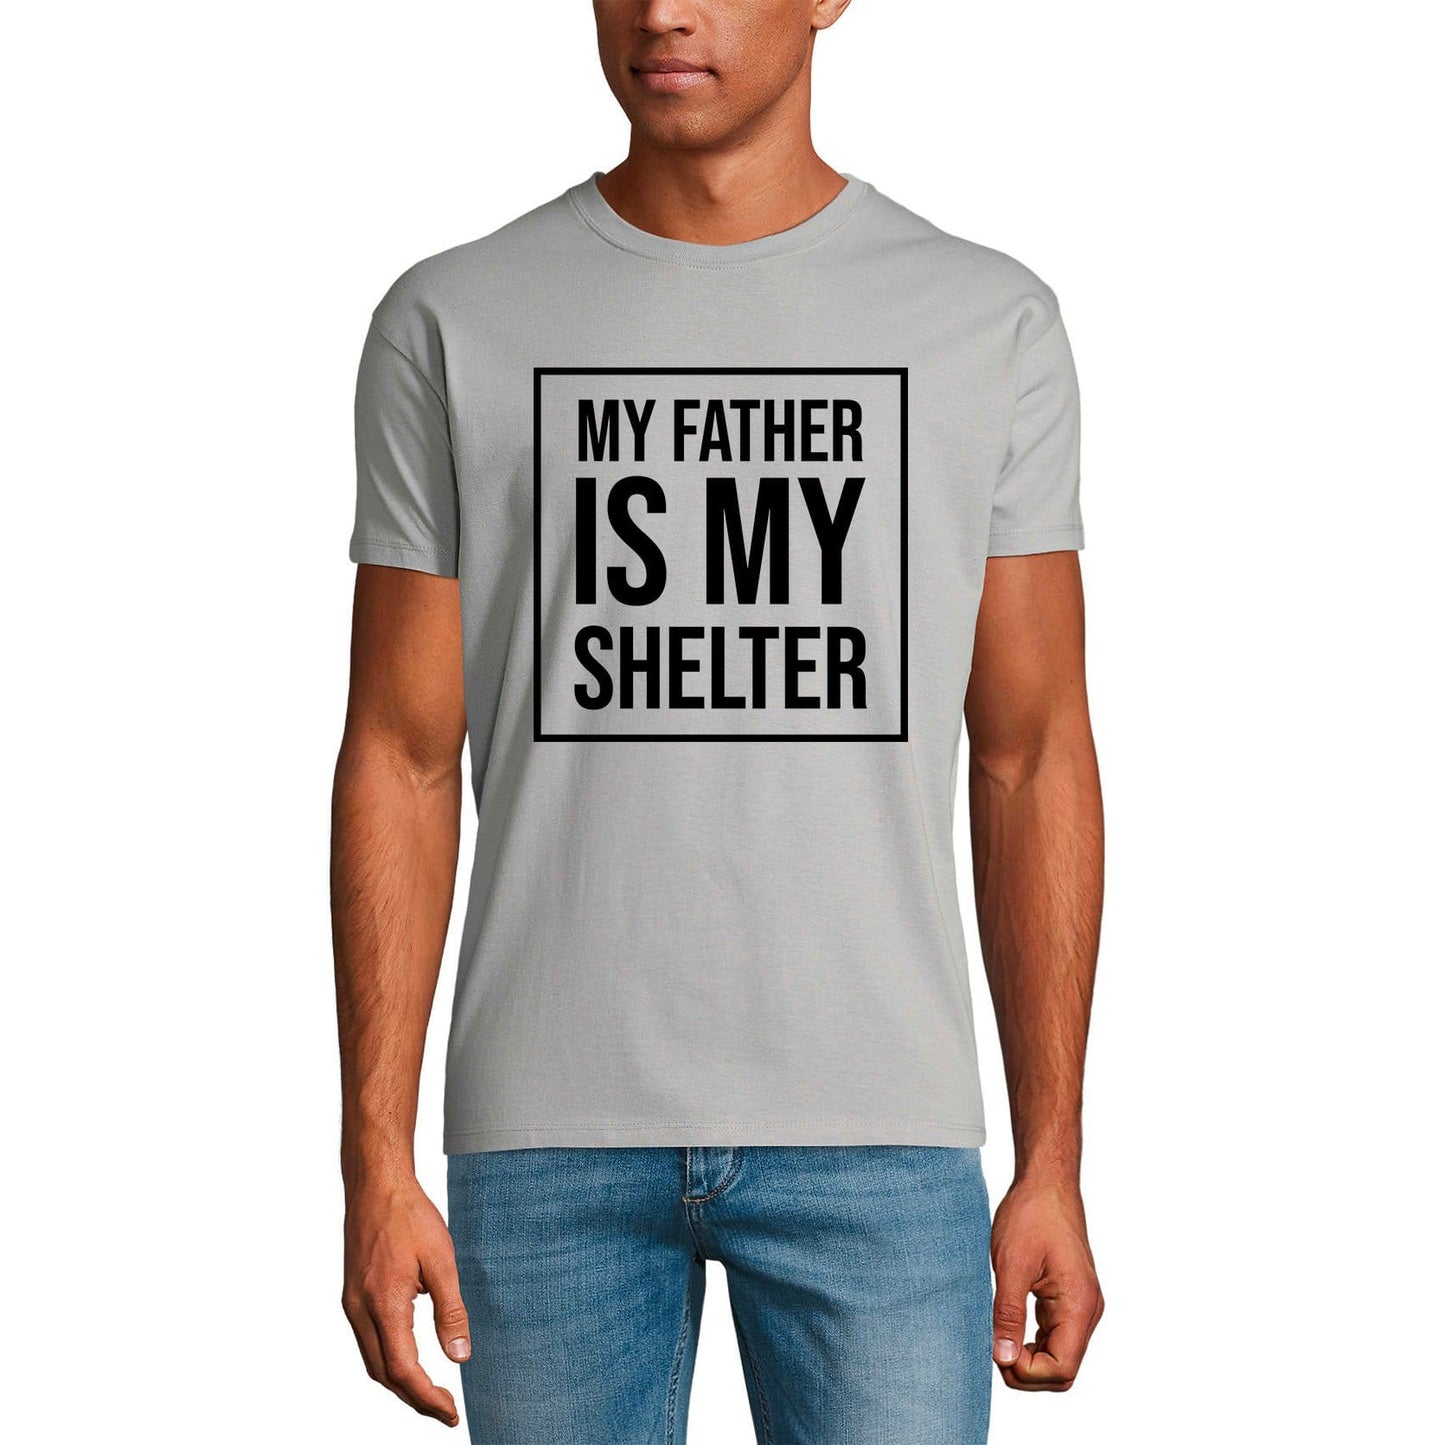 ULTRABASIC Men's T-Shirt My Father Is My Shelter - Gift For Father's Day